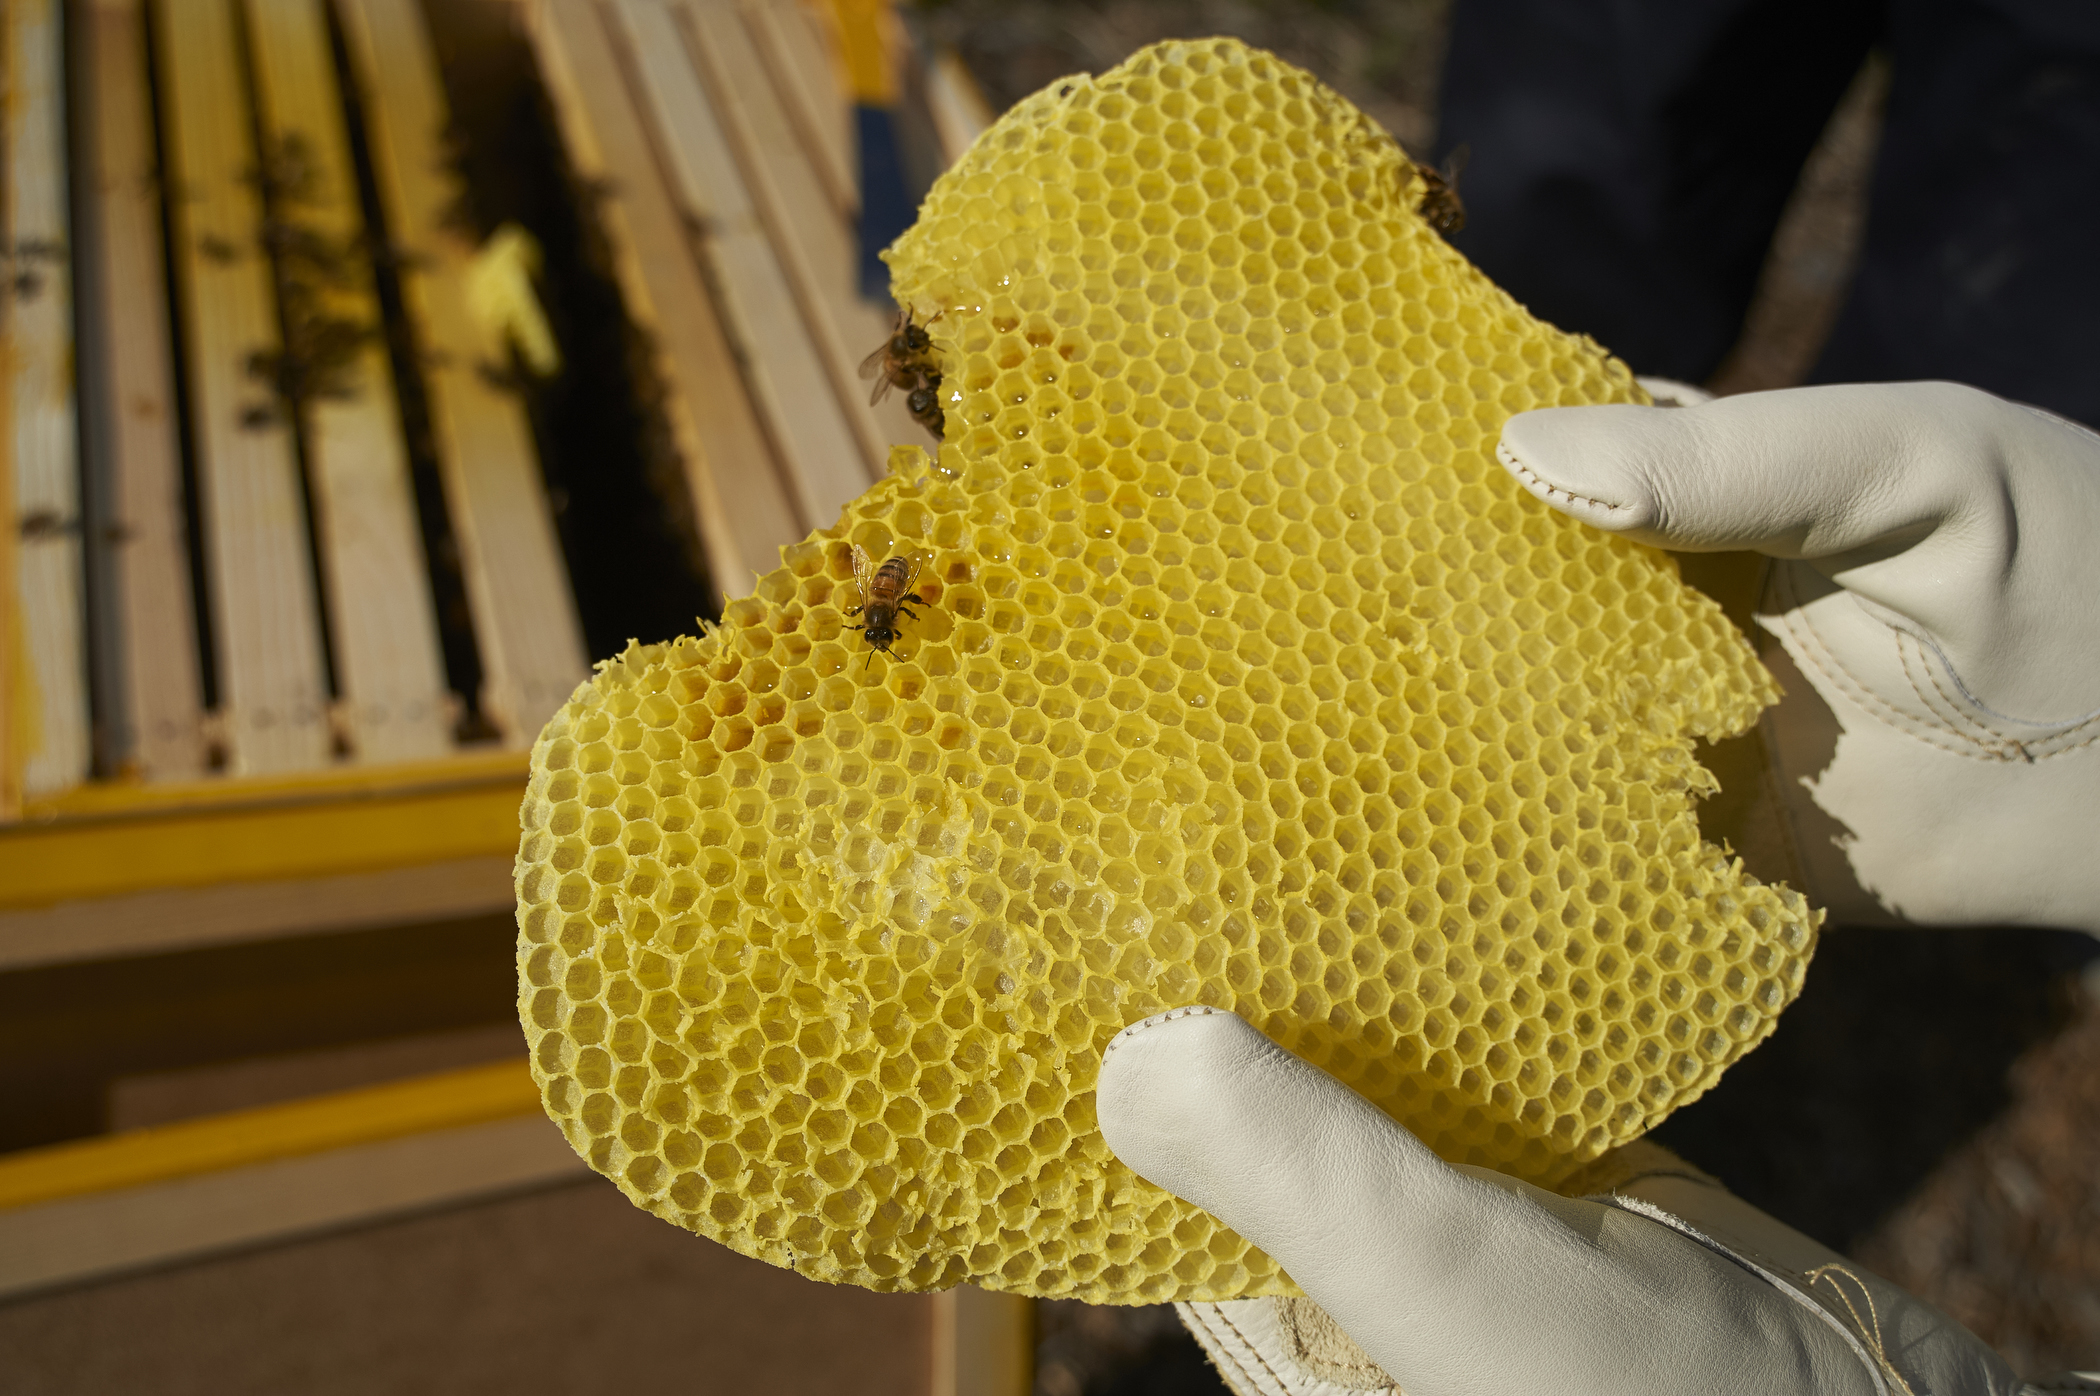 A researcher holding honeycomb